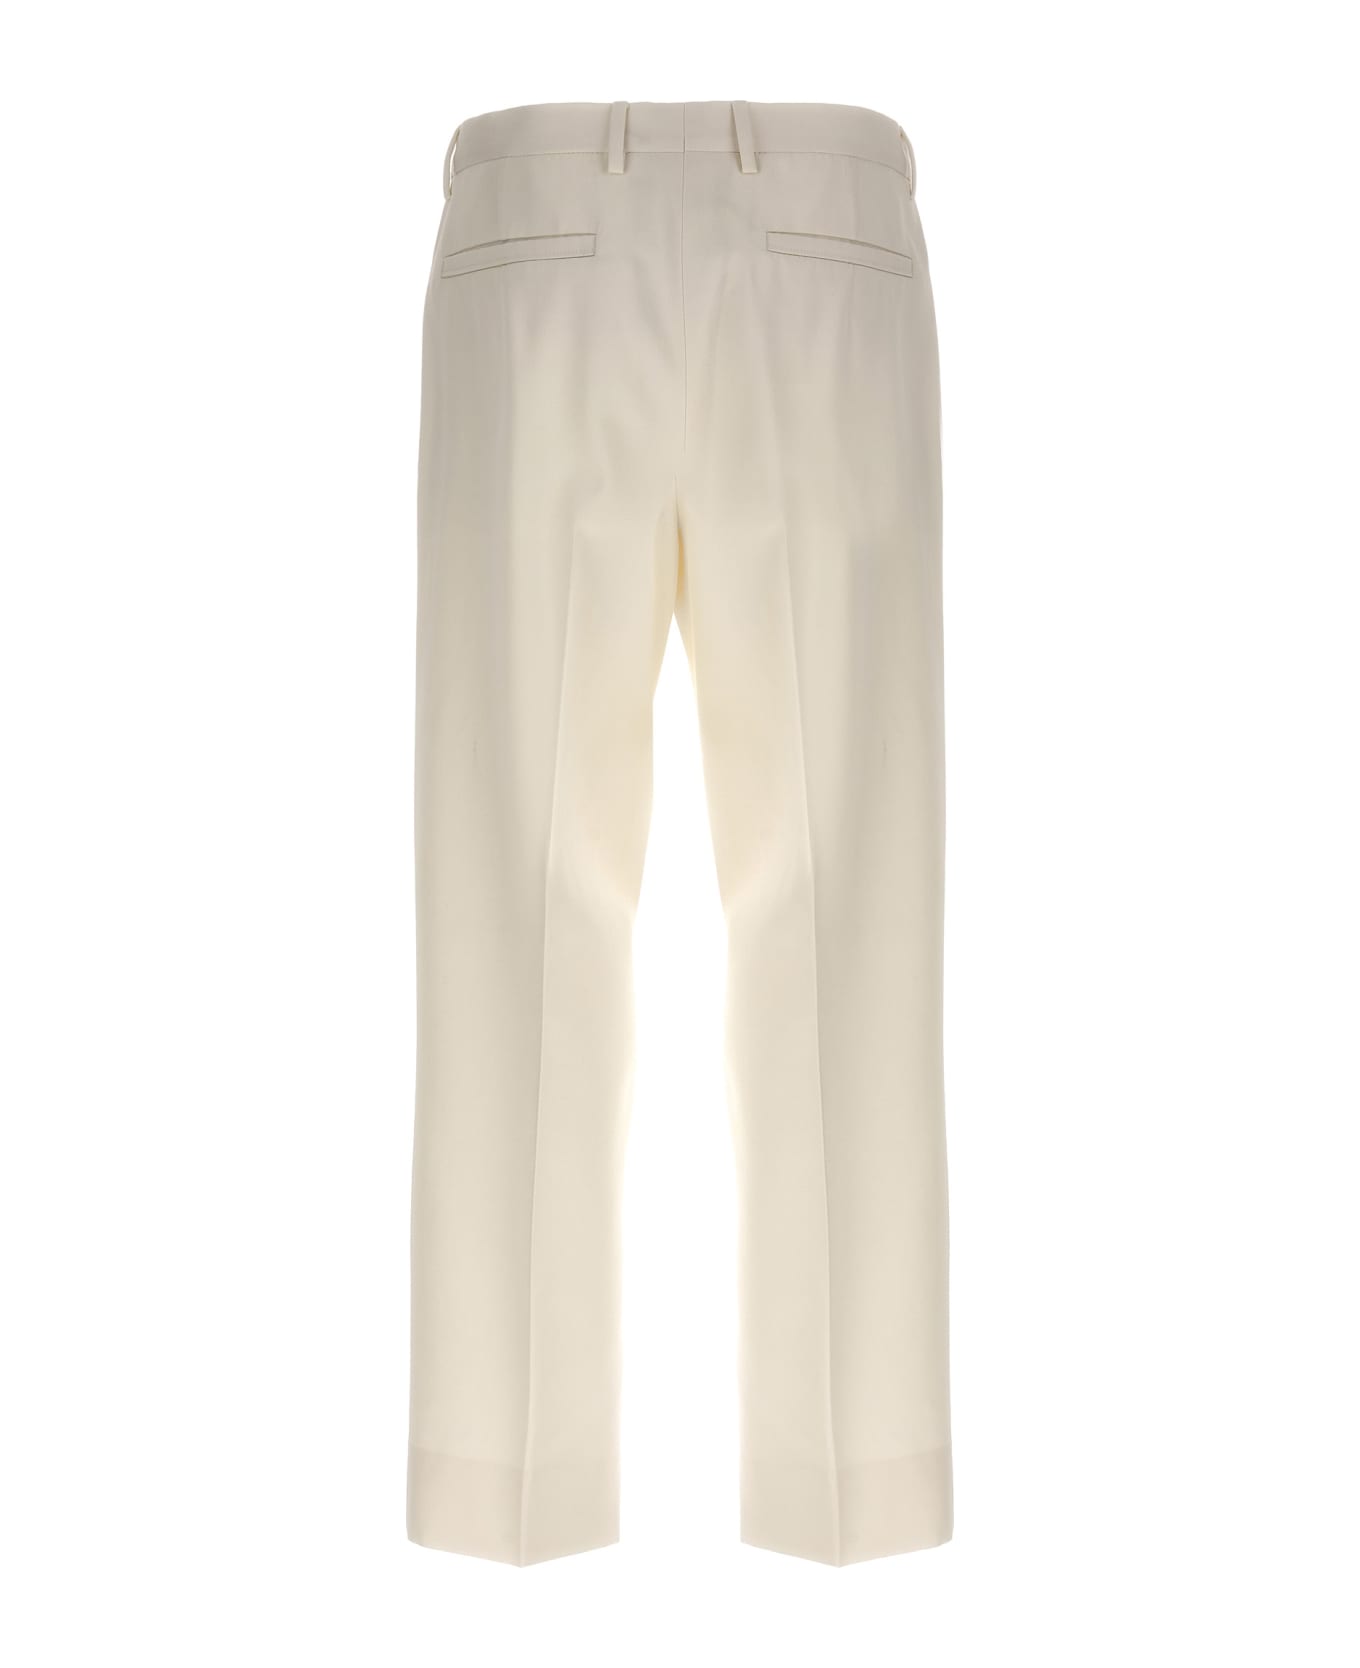 Zegna Front Pleat Pants - White ボトムス